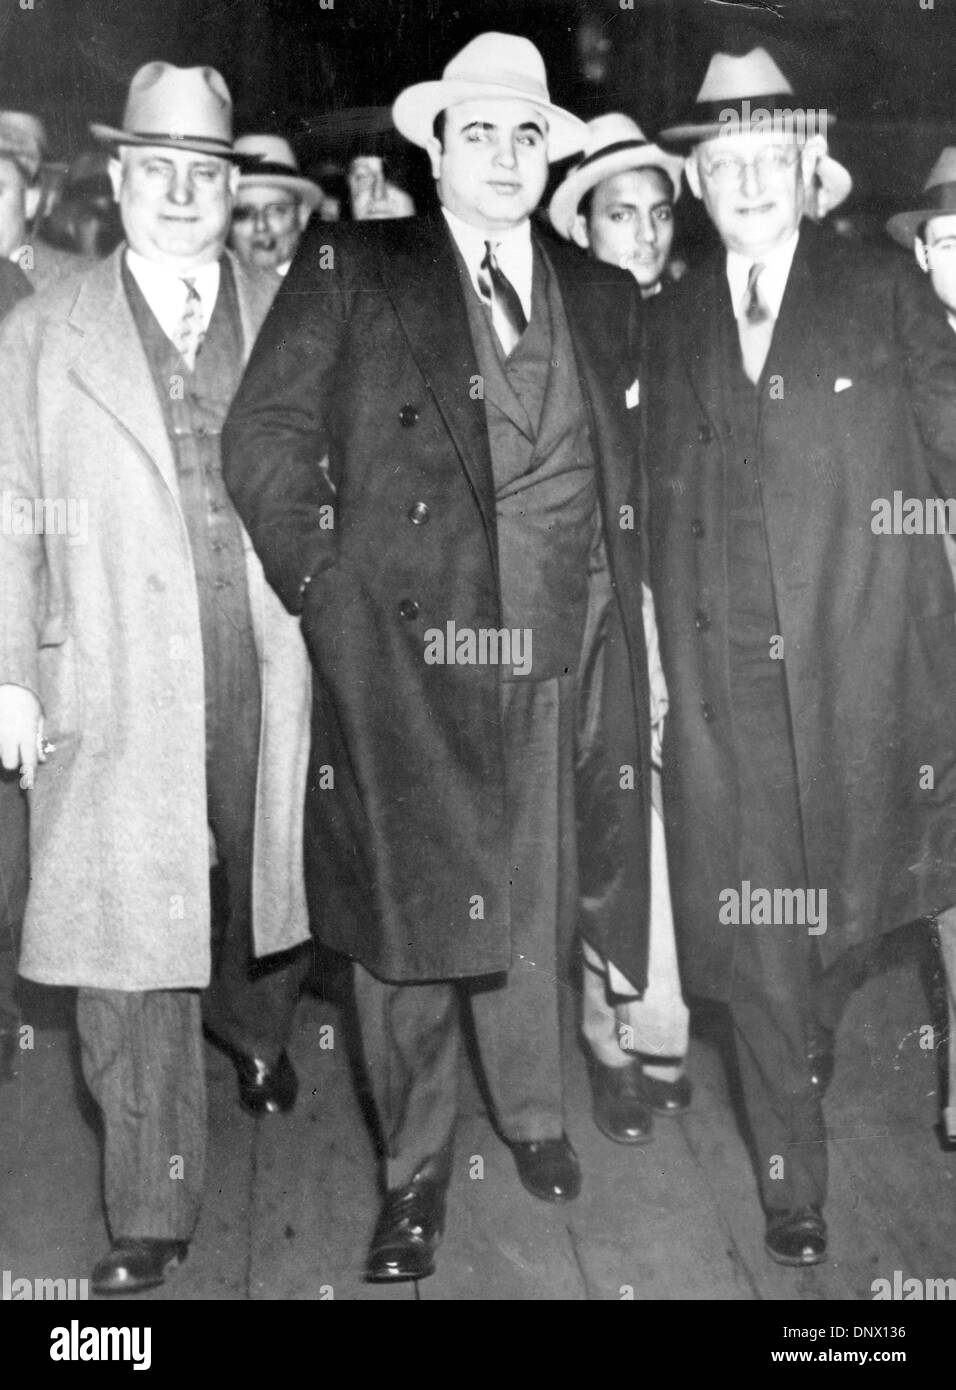 May 14, 1929 - New York, NY, U.S. - AL CAPONE (C) with MARSHALL LAUBENHEIMER (R) in New York. Al Capone is America's best known gangster and the single greatest symbol of the collapse of law and order in the United States during the 1920s Prohibition era. Capone had a leading role in the illegal activities that lent Chicago its reputation as a lawless city.  (Credit Image: © KEYSTO Stock Photo